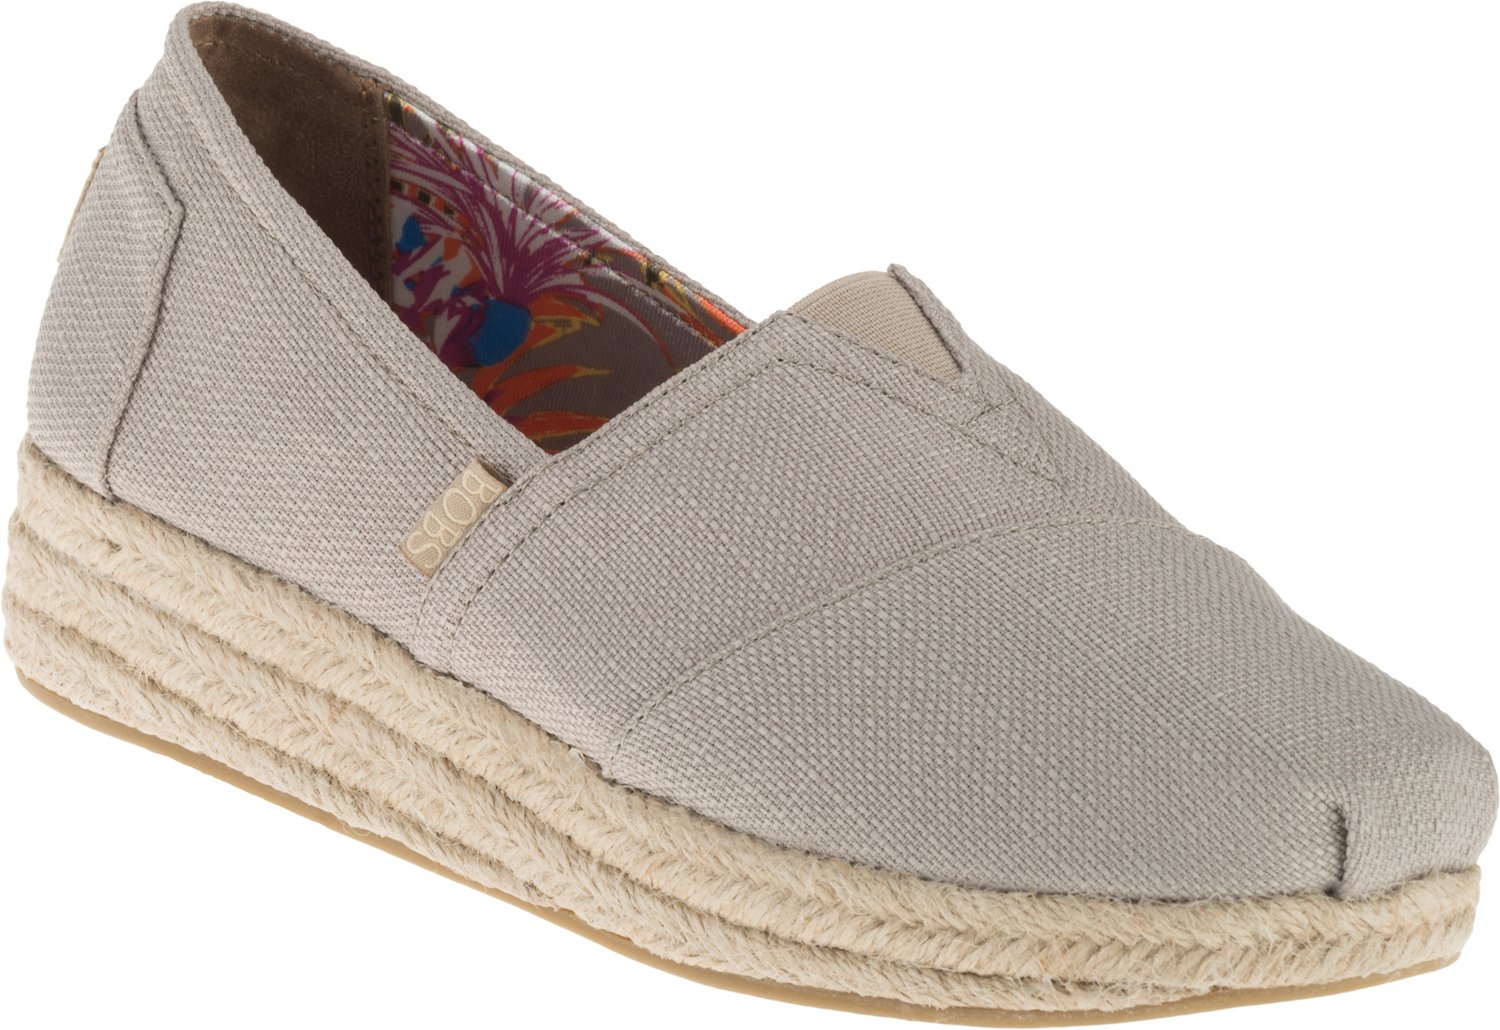 SKECHERS Women's BOBS Highlights Casual Wedge Shoes | Academy